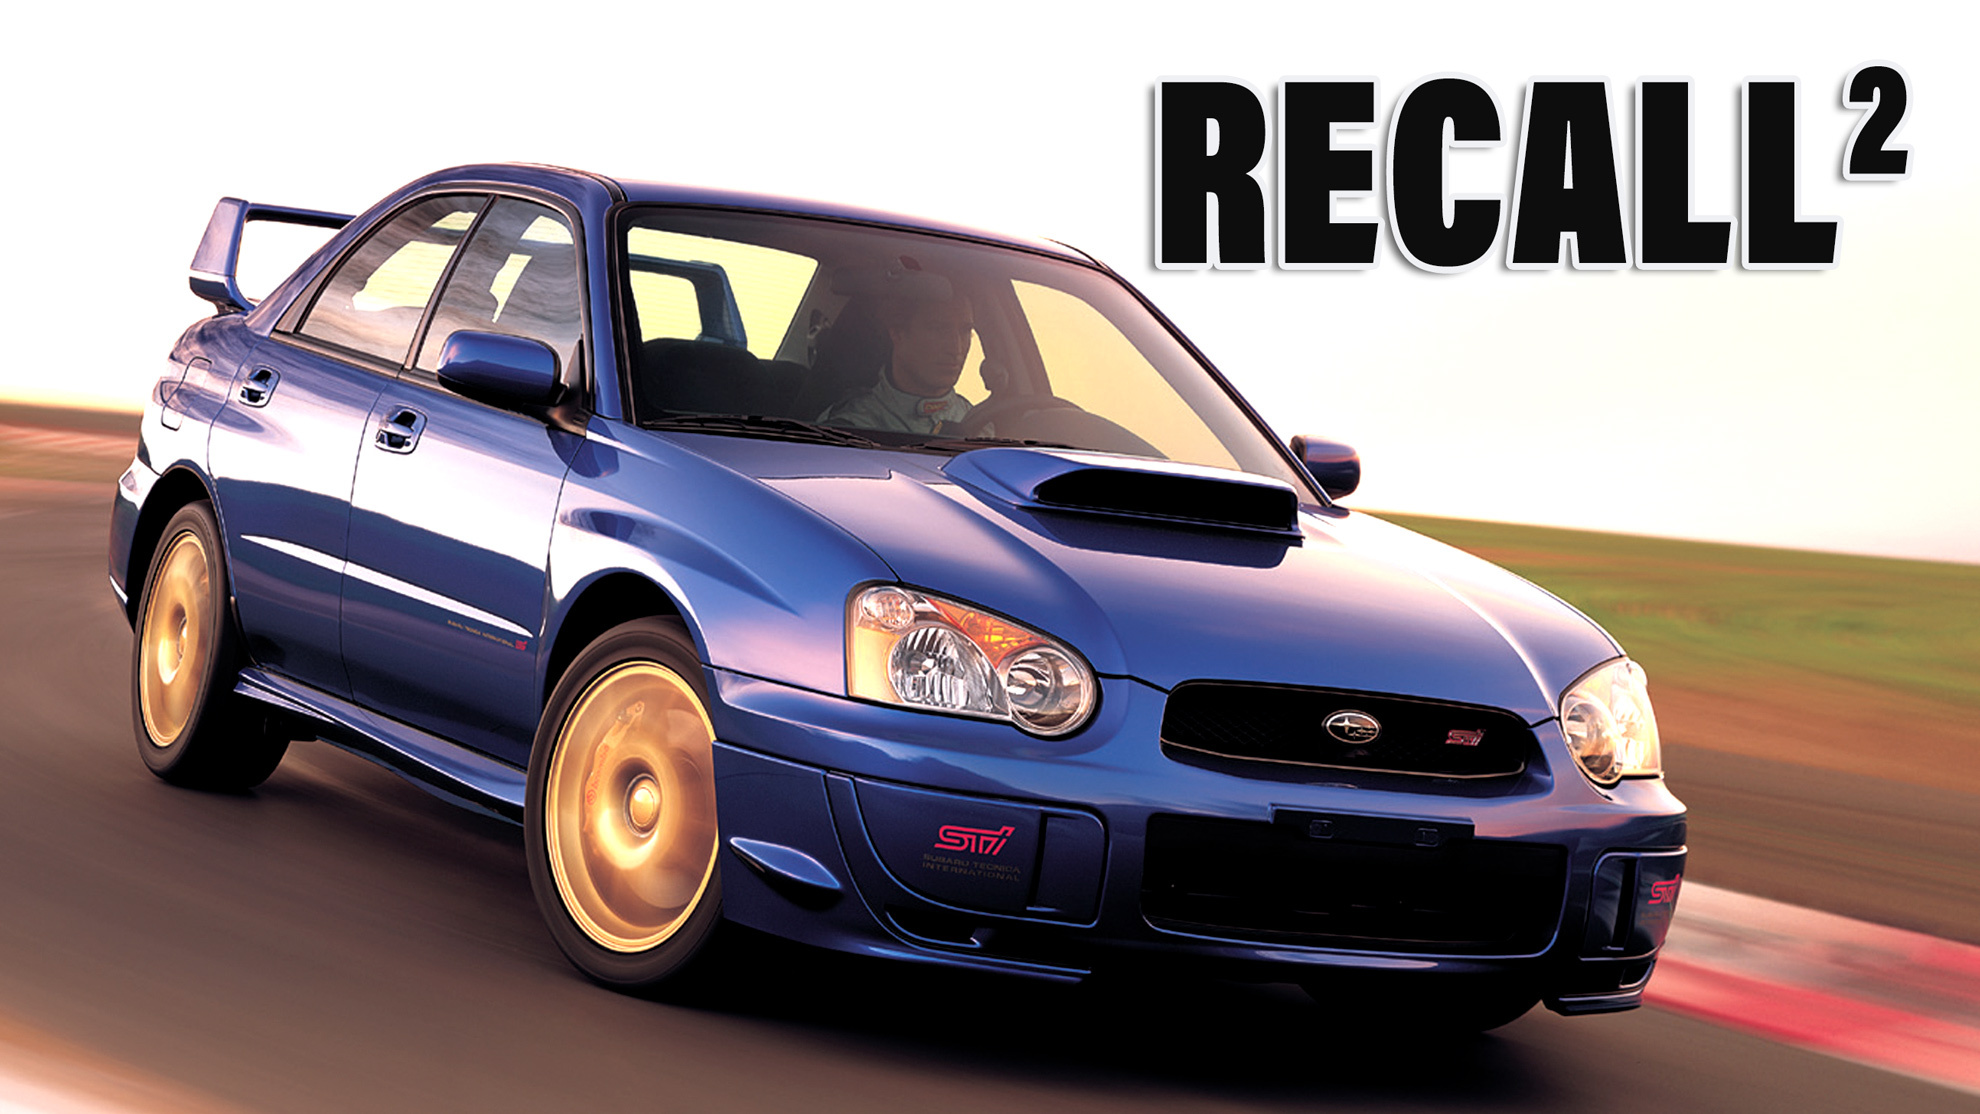 Over 100 Older Subaru Impreza And WRXs At Risk Over Potentially Botched  Recall Repair | Carscoops